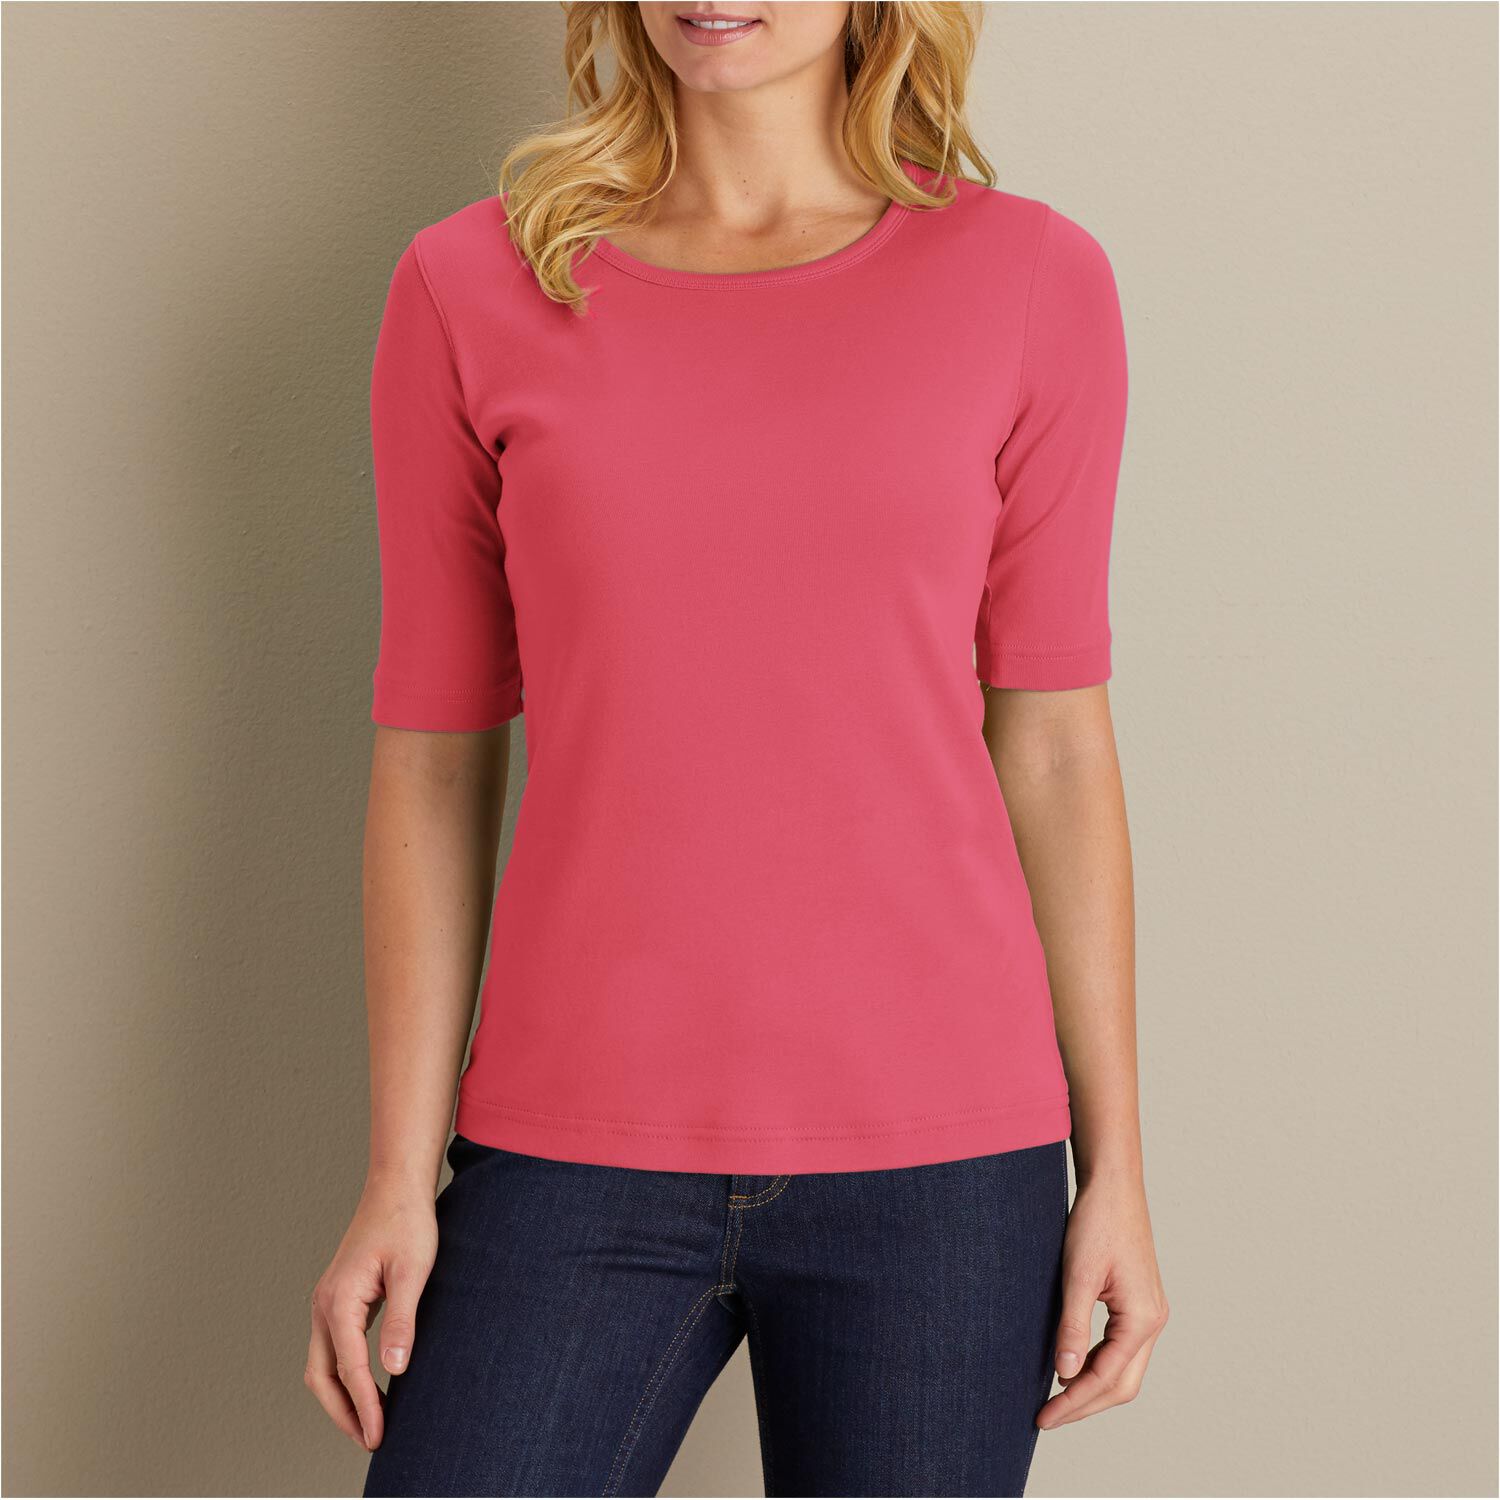 Women's Longtail T Elbow Sleeve Scoopneck | Duluth Trading Company